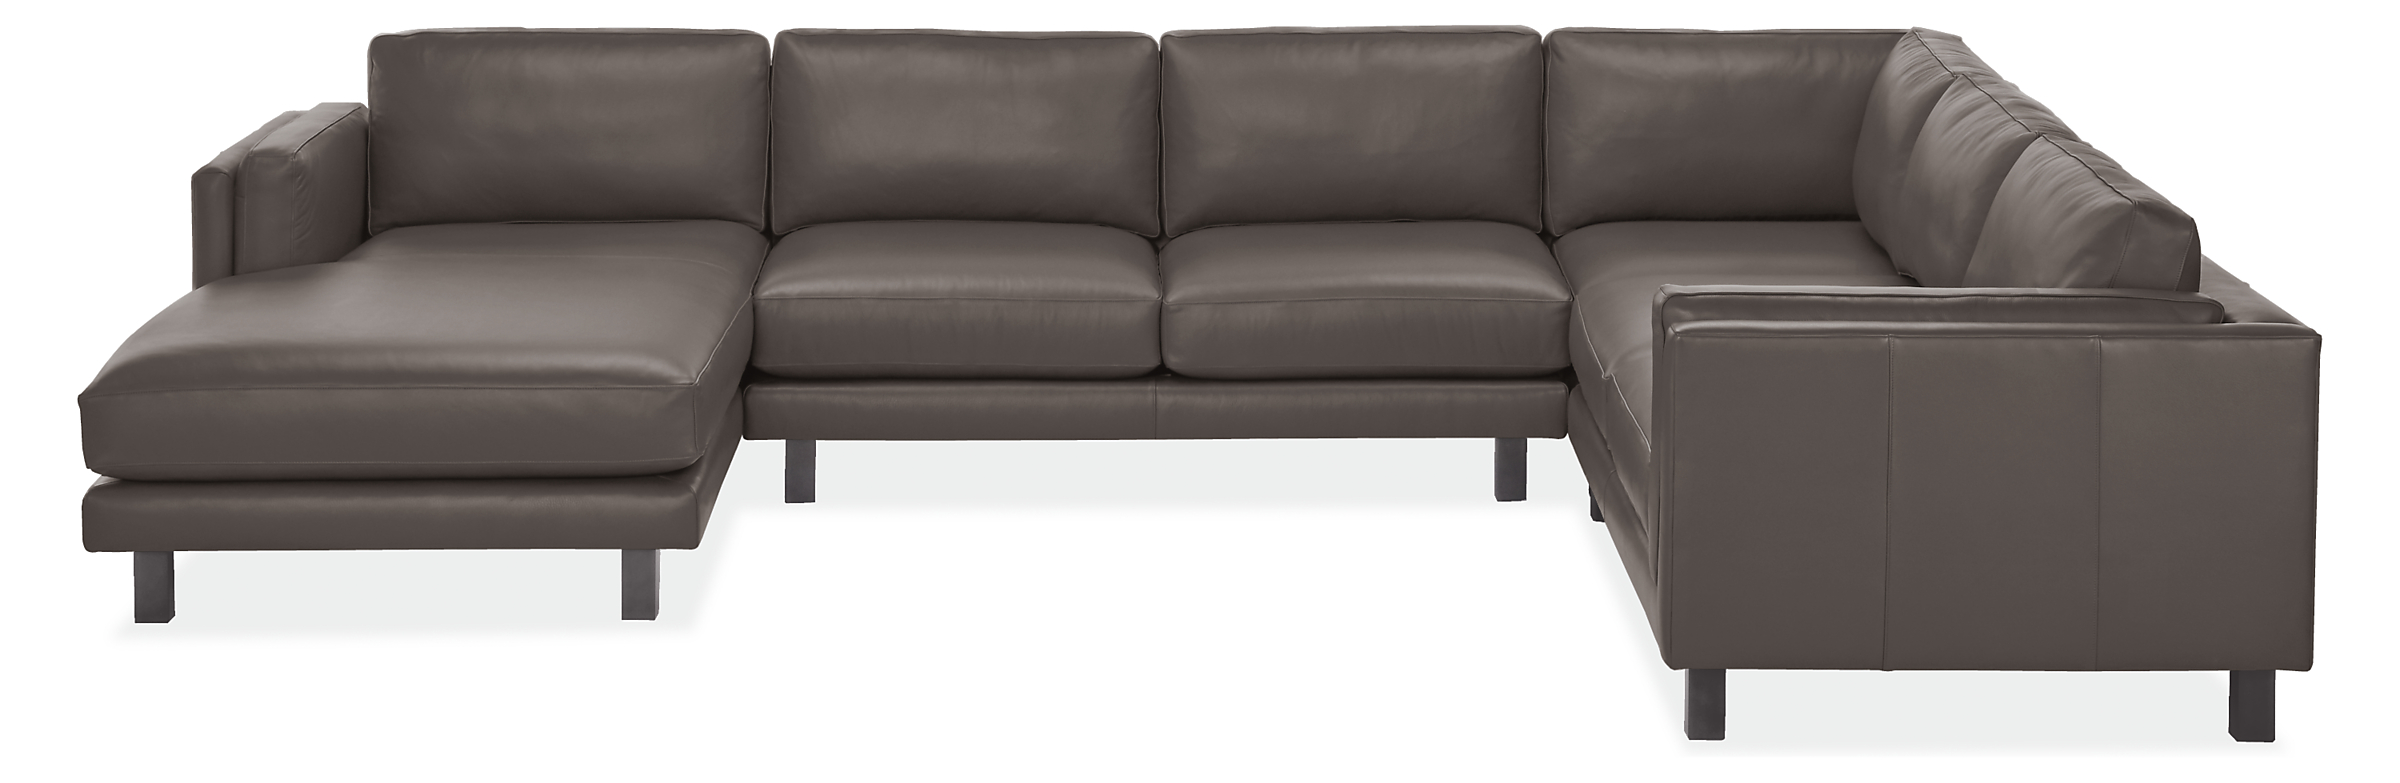 Cade Leather Sectional